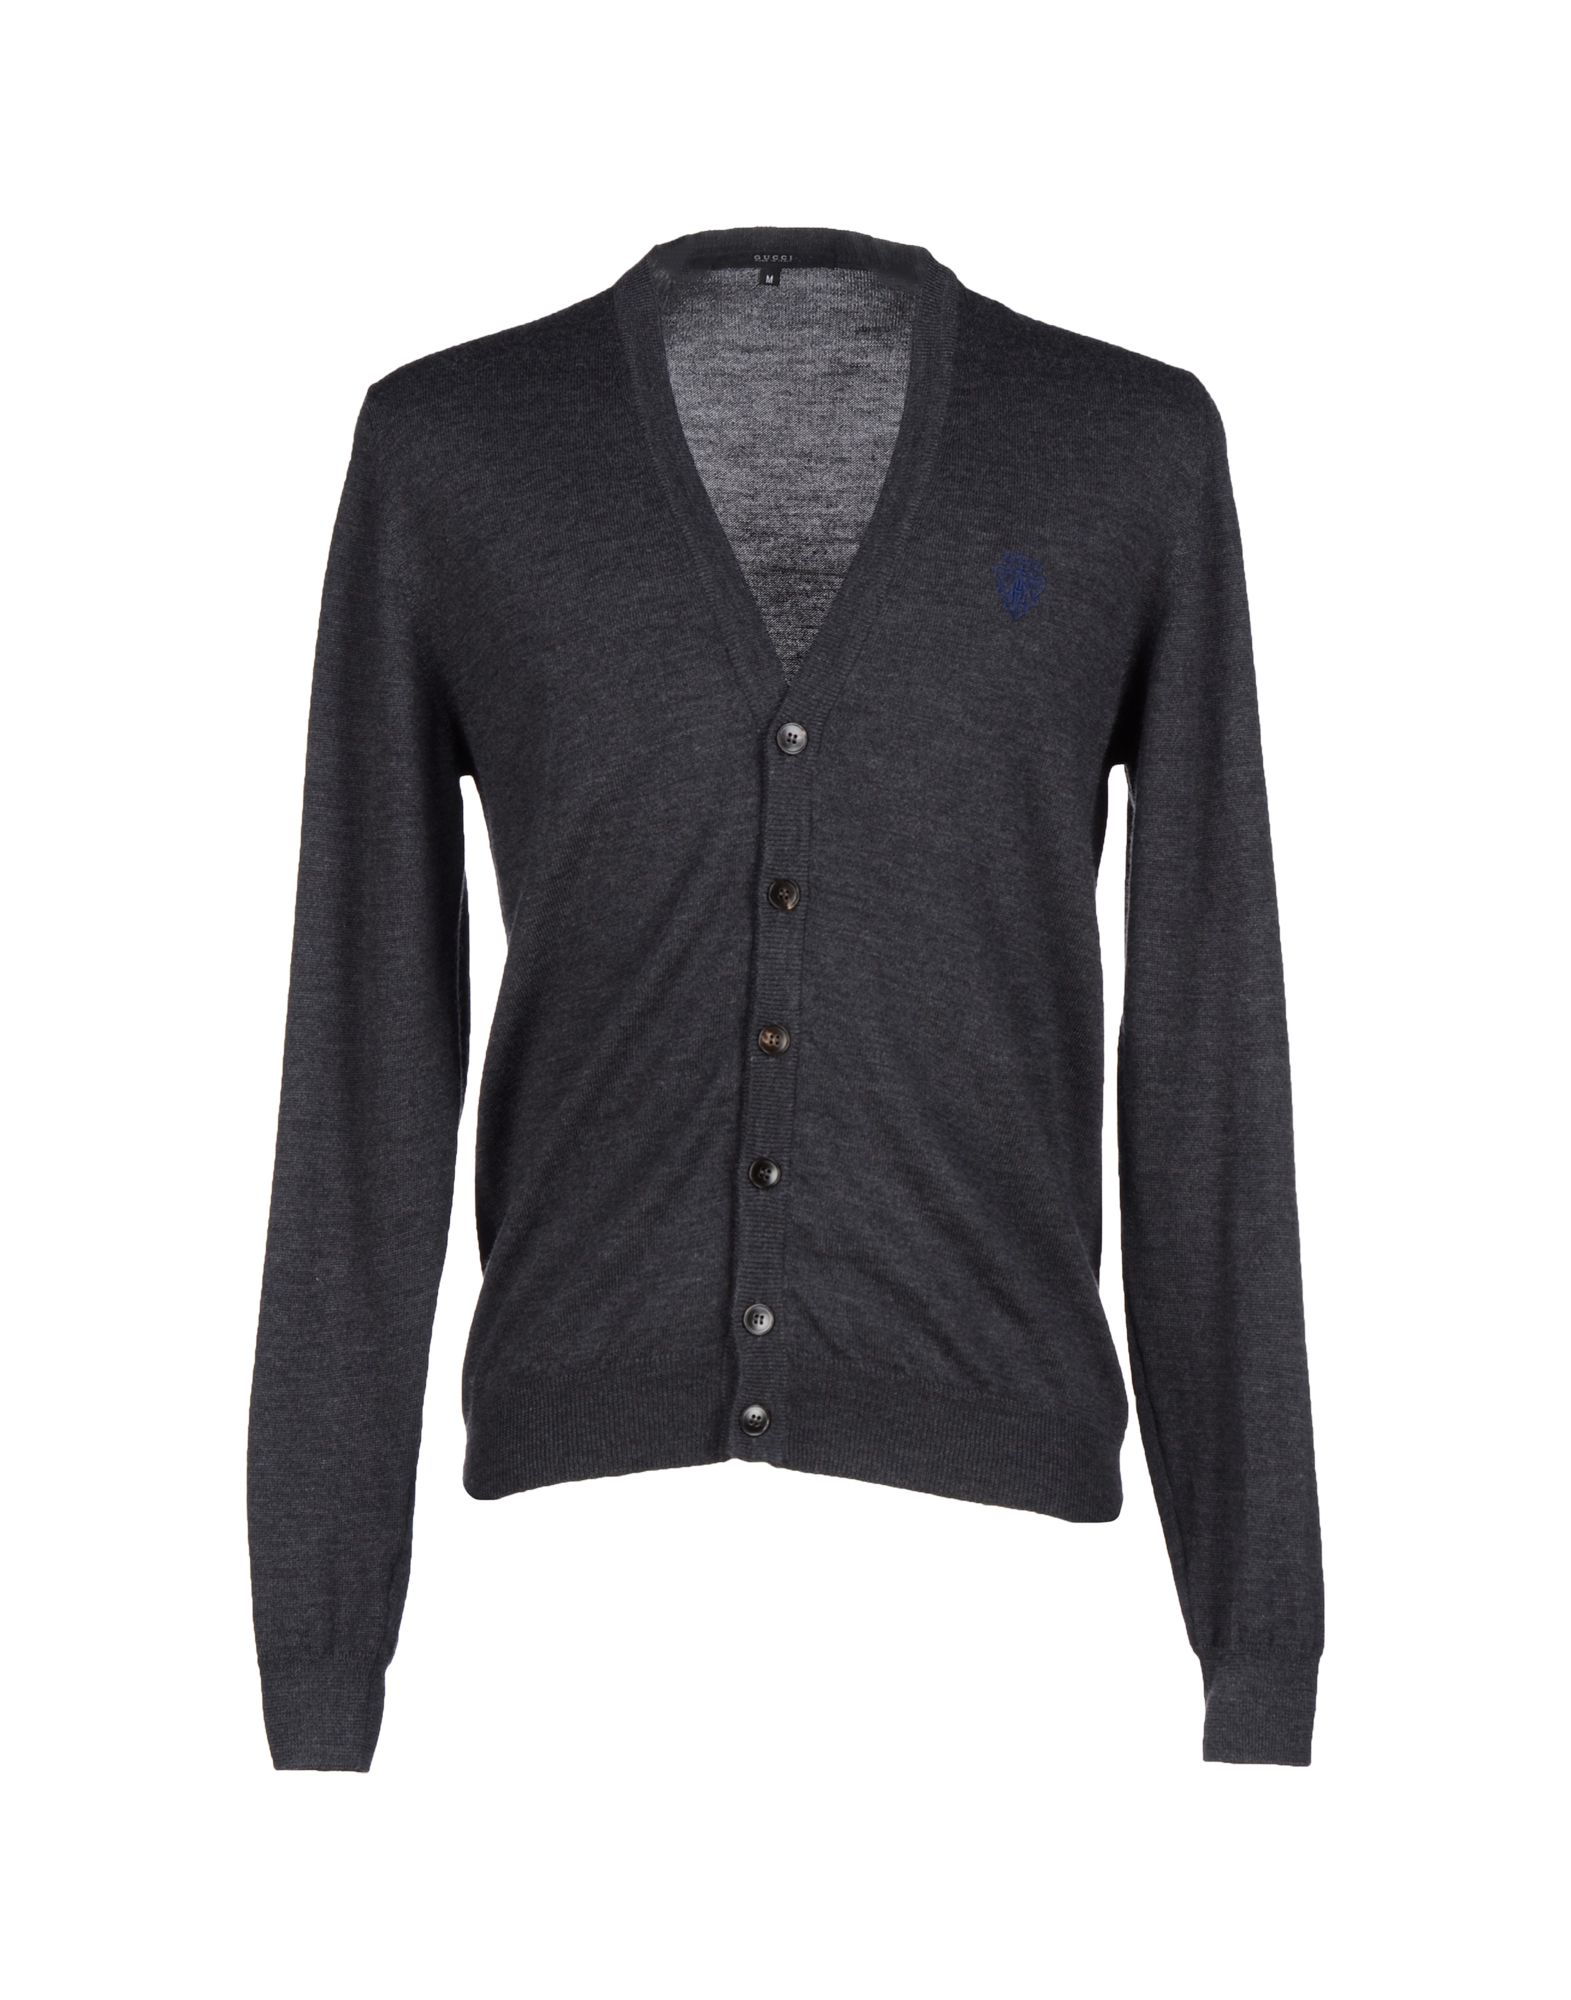 Lyst - Gucci Cardigan in Gray for Men